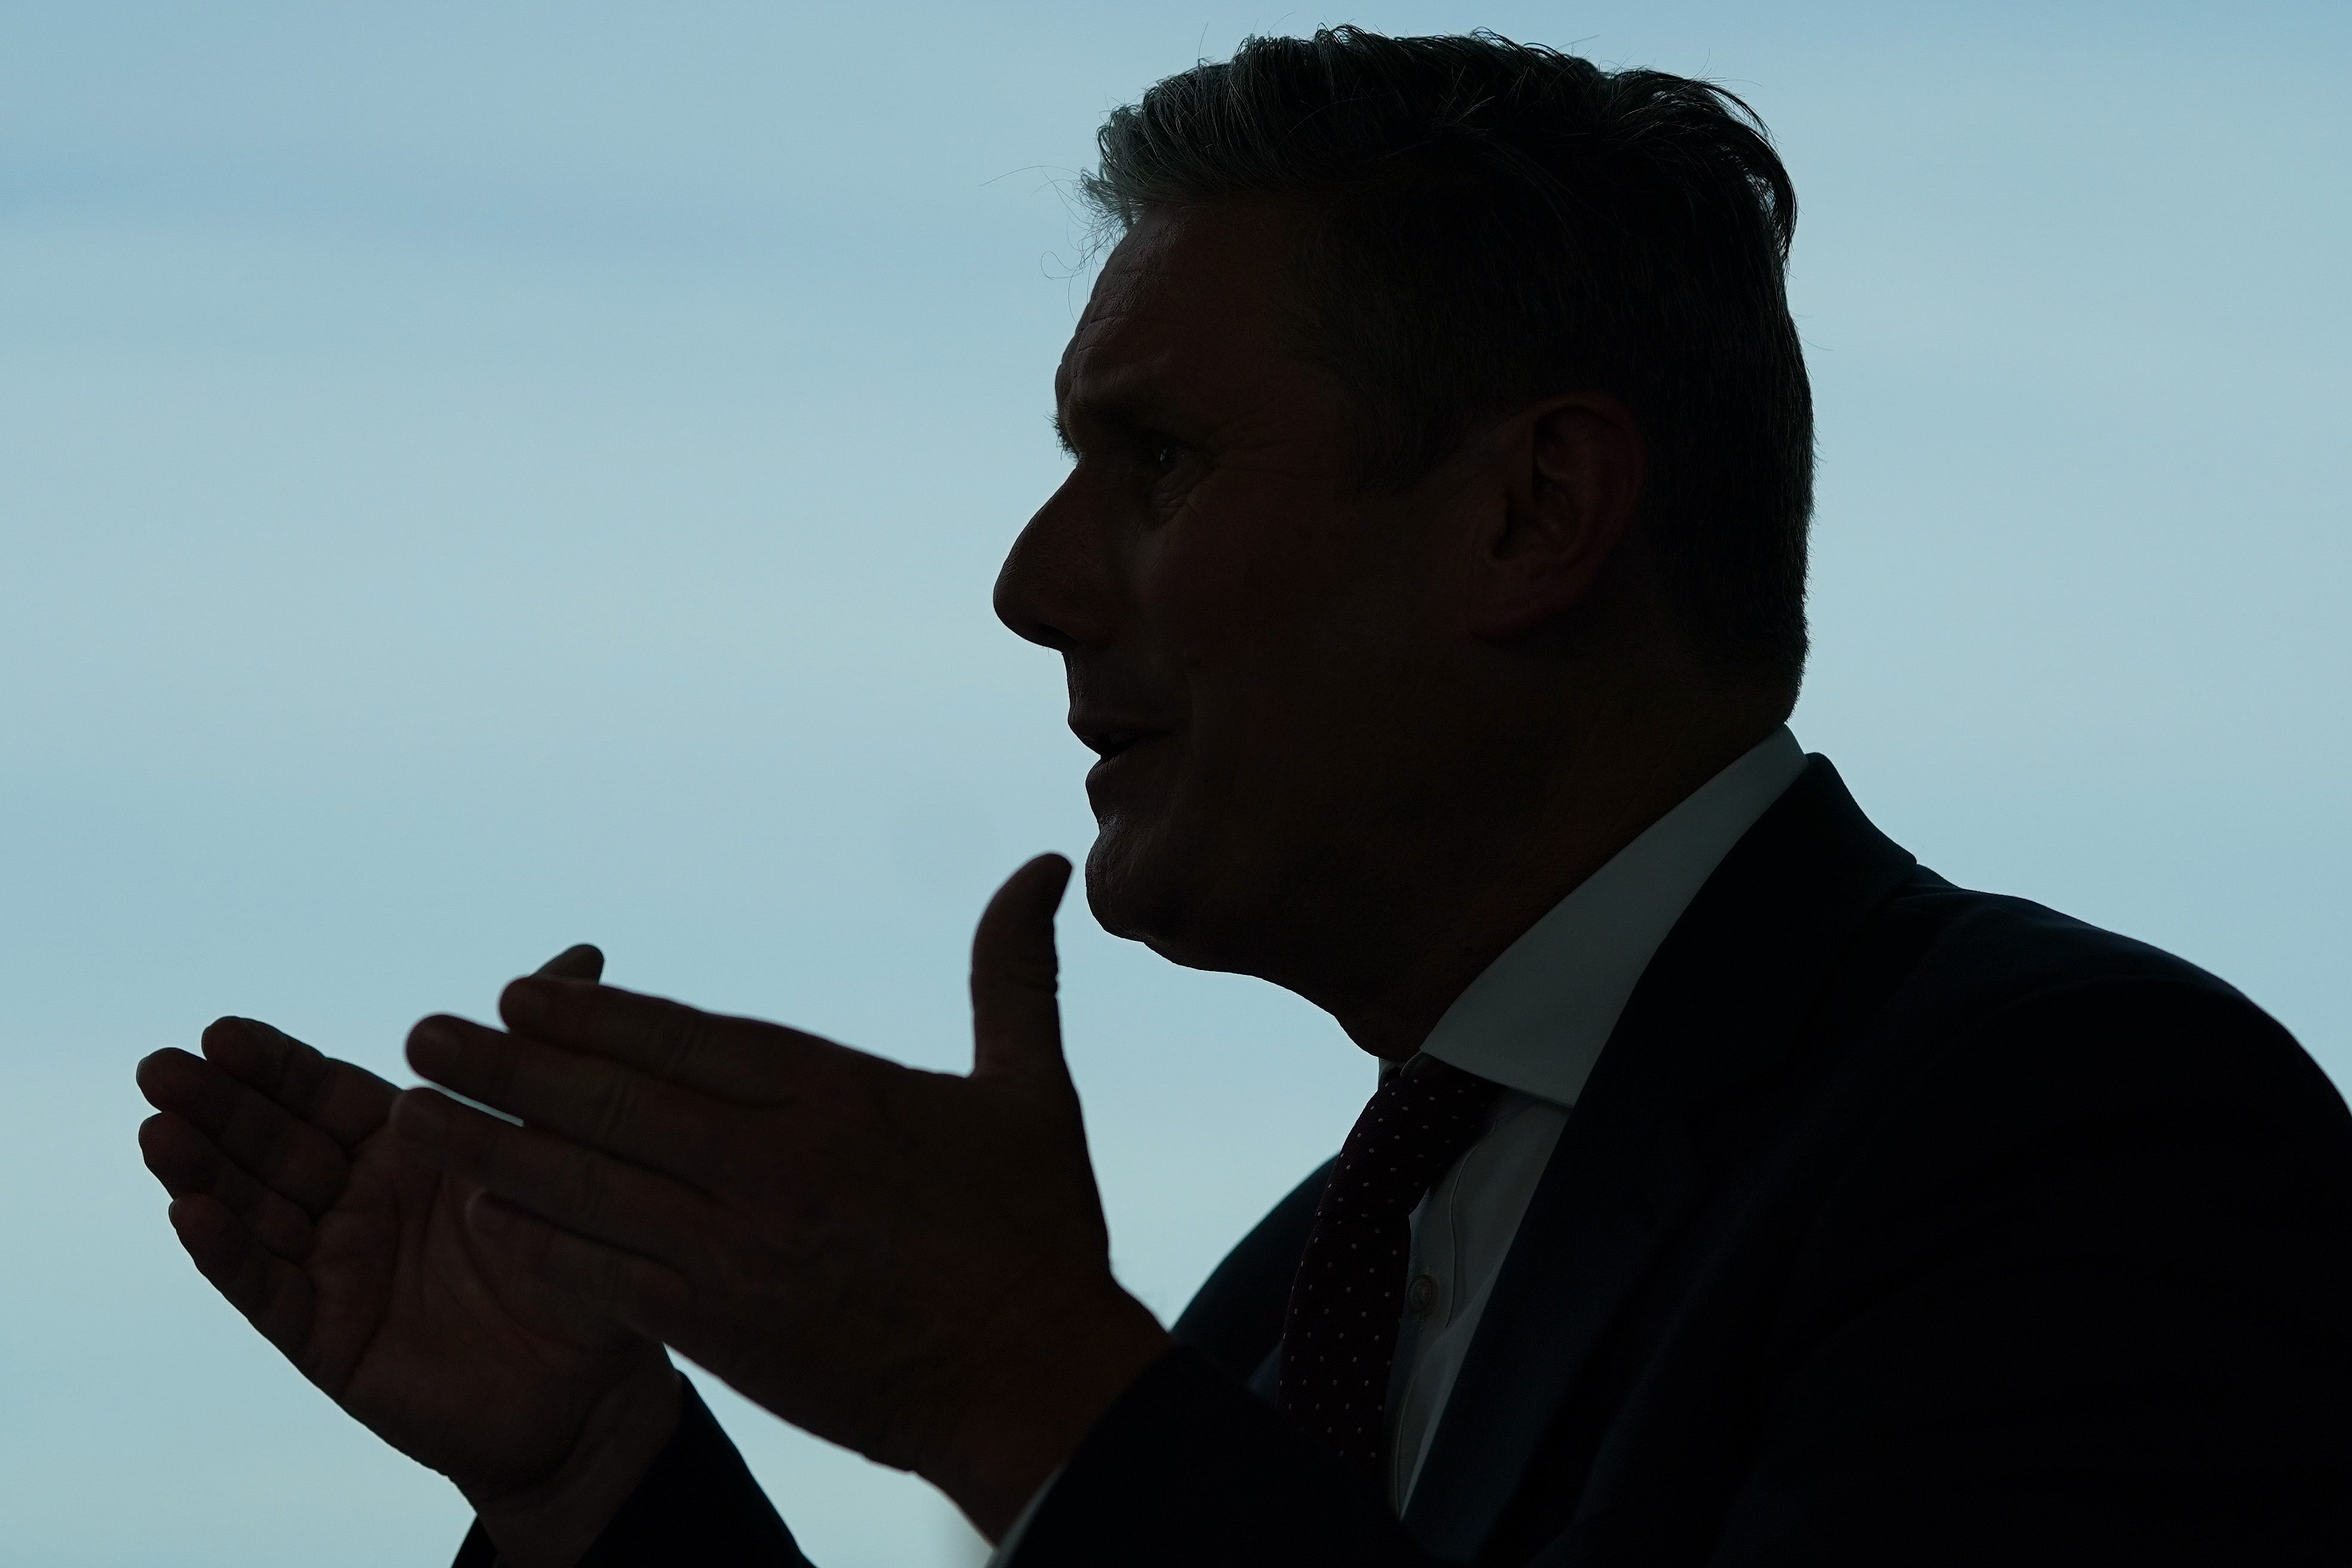 Starmer absolutely should not be criticised for being on holiday